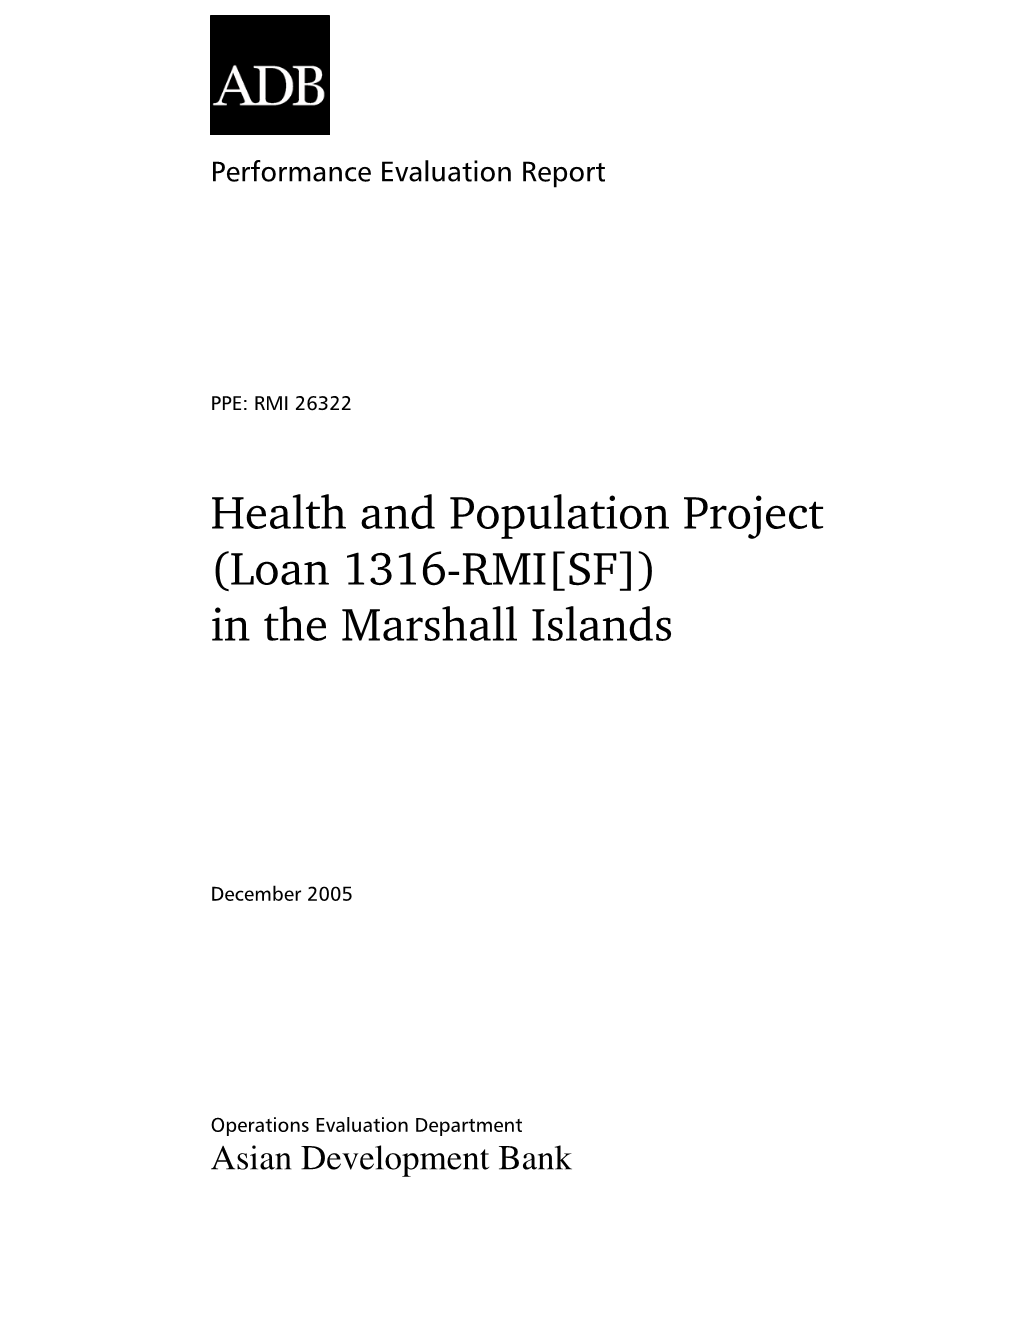 Health and Population Project (Loan 1316-RMI[SF]) in the Marshall Islands